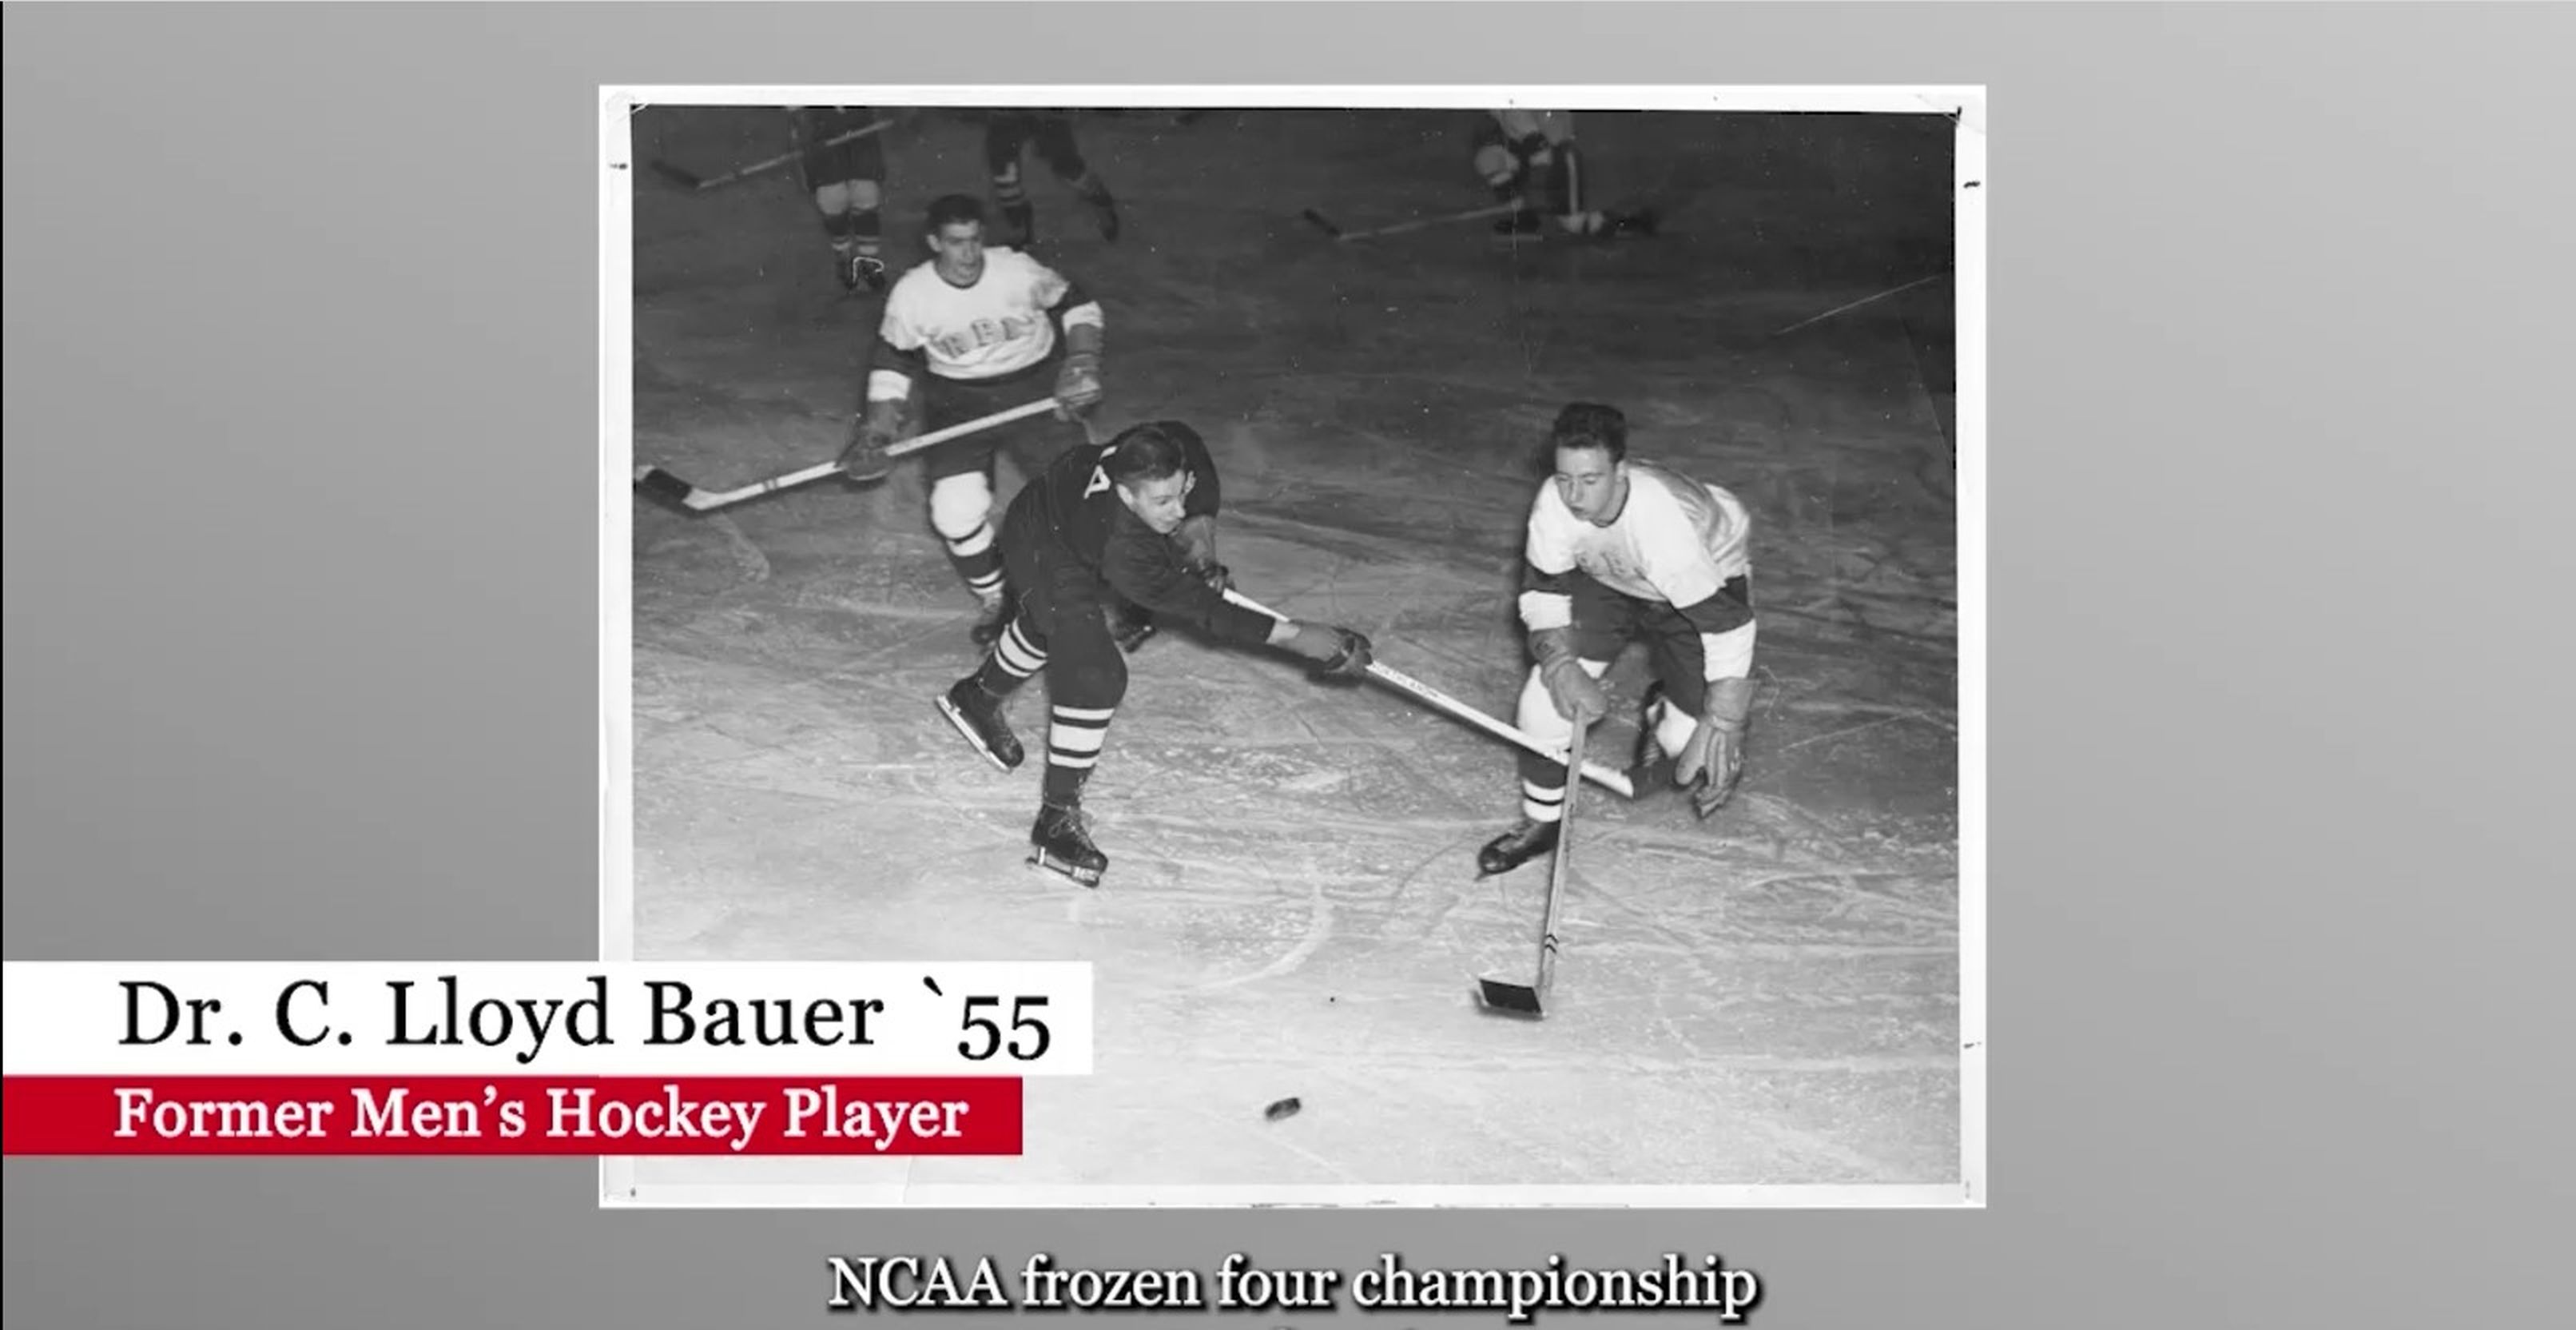 Image of Lloyd Bauer, class of 1955 and 1954 NCAA Hockey Champion